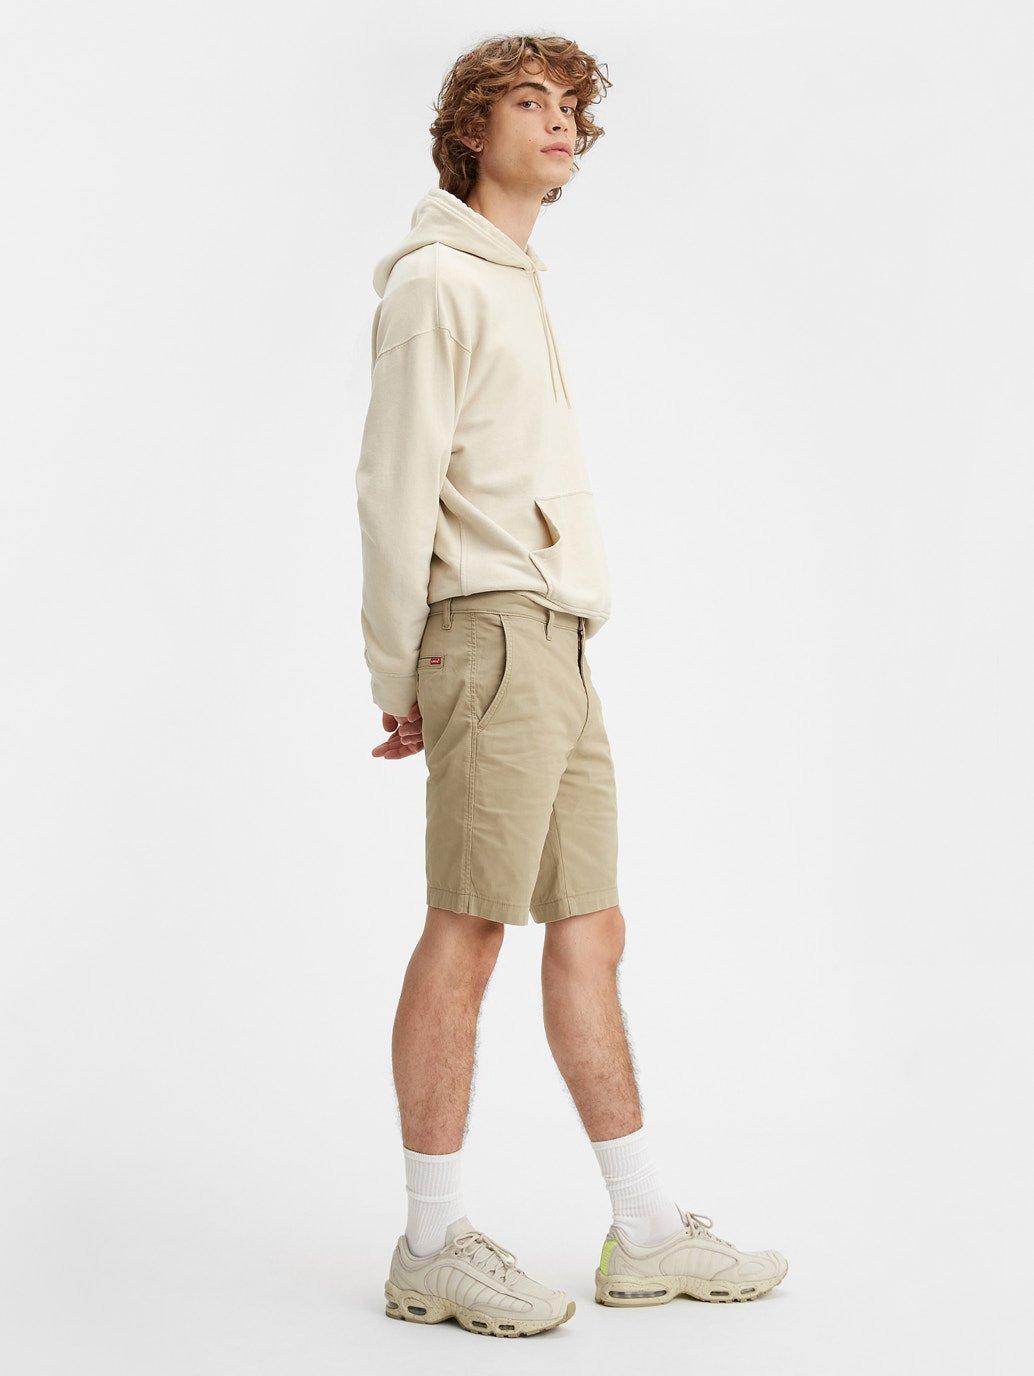 Buy Levi's® Men's XX Chino Shorts | Levi's® Official Online Store PH